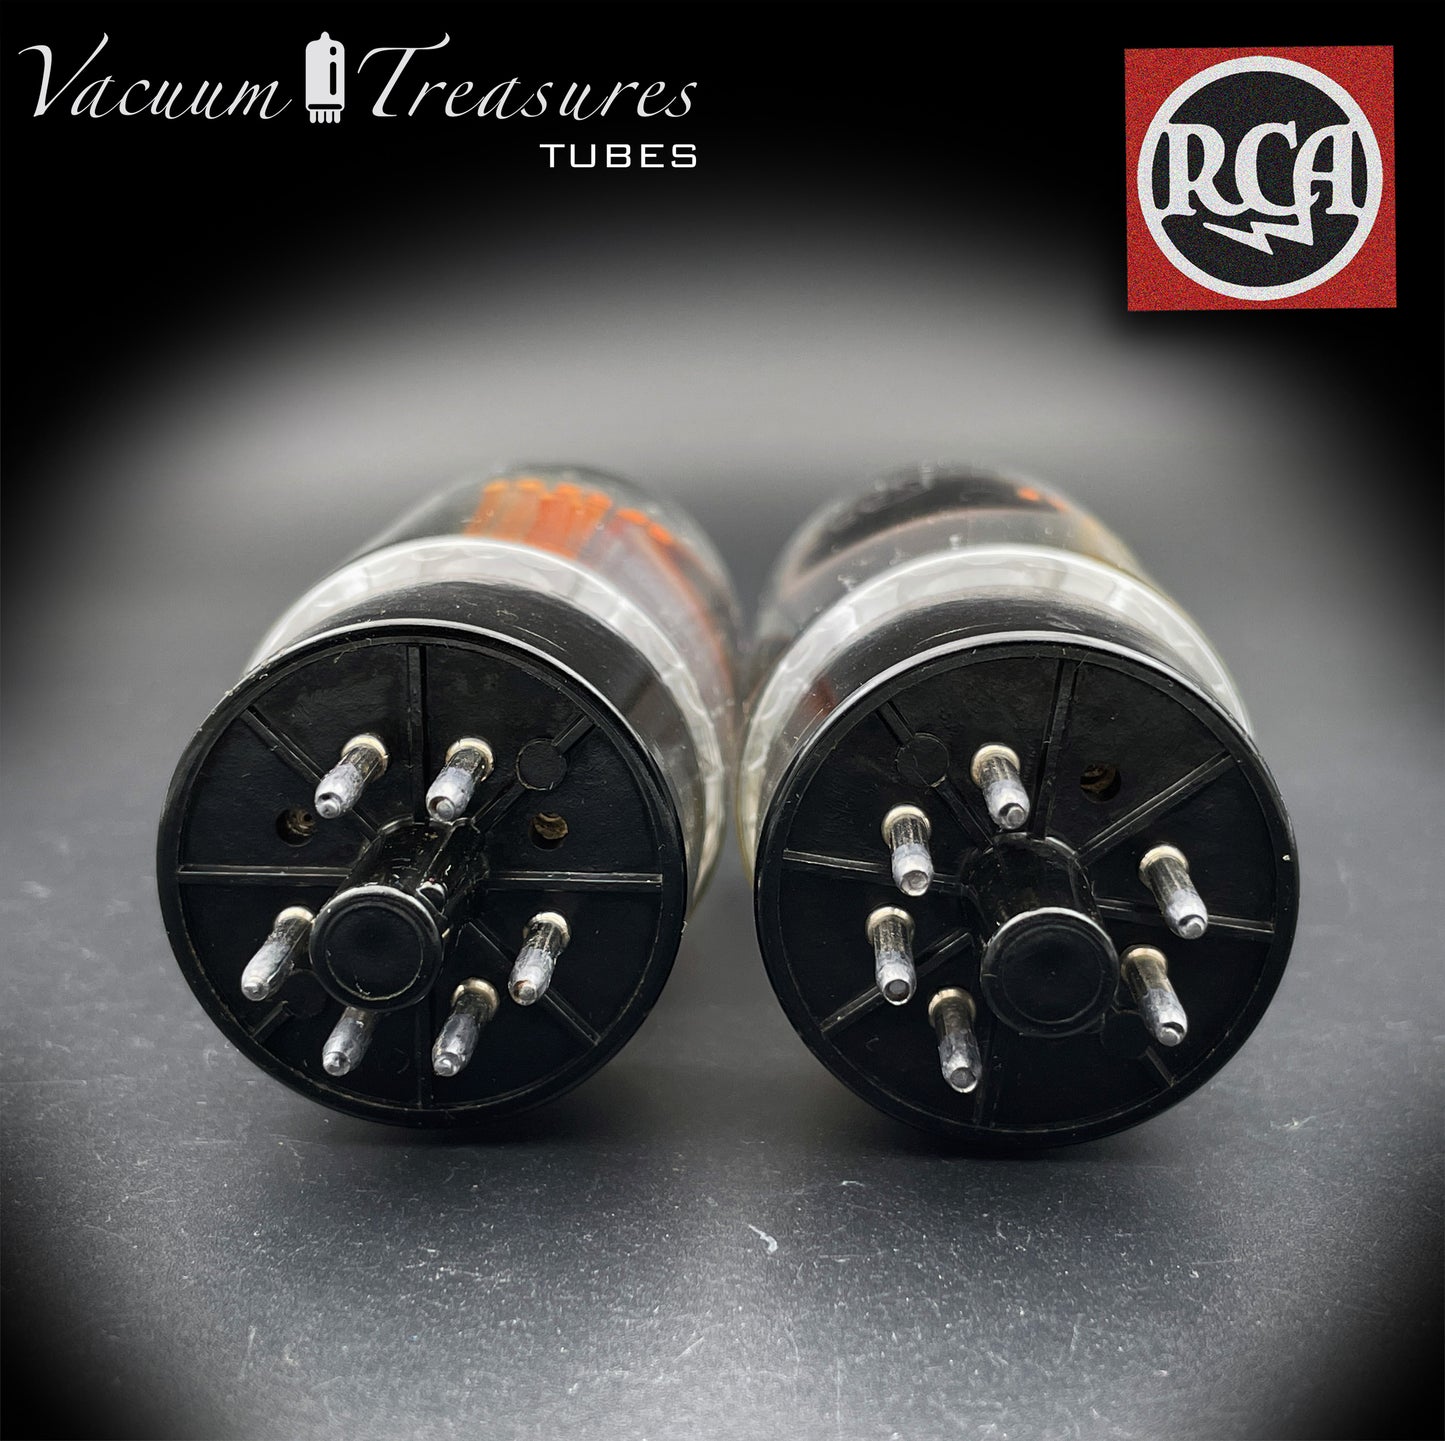 6L6GC RCA Black Plates Side OO Getter Matched Tubes Hergestellt in den USA